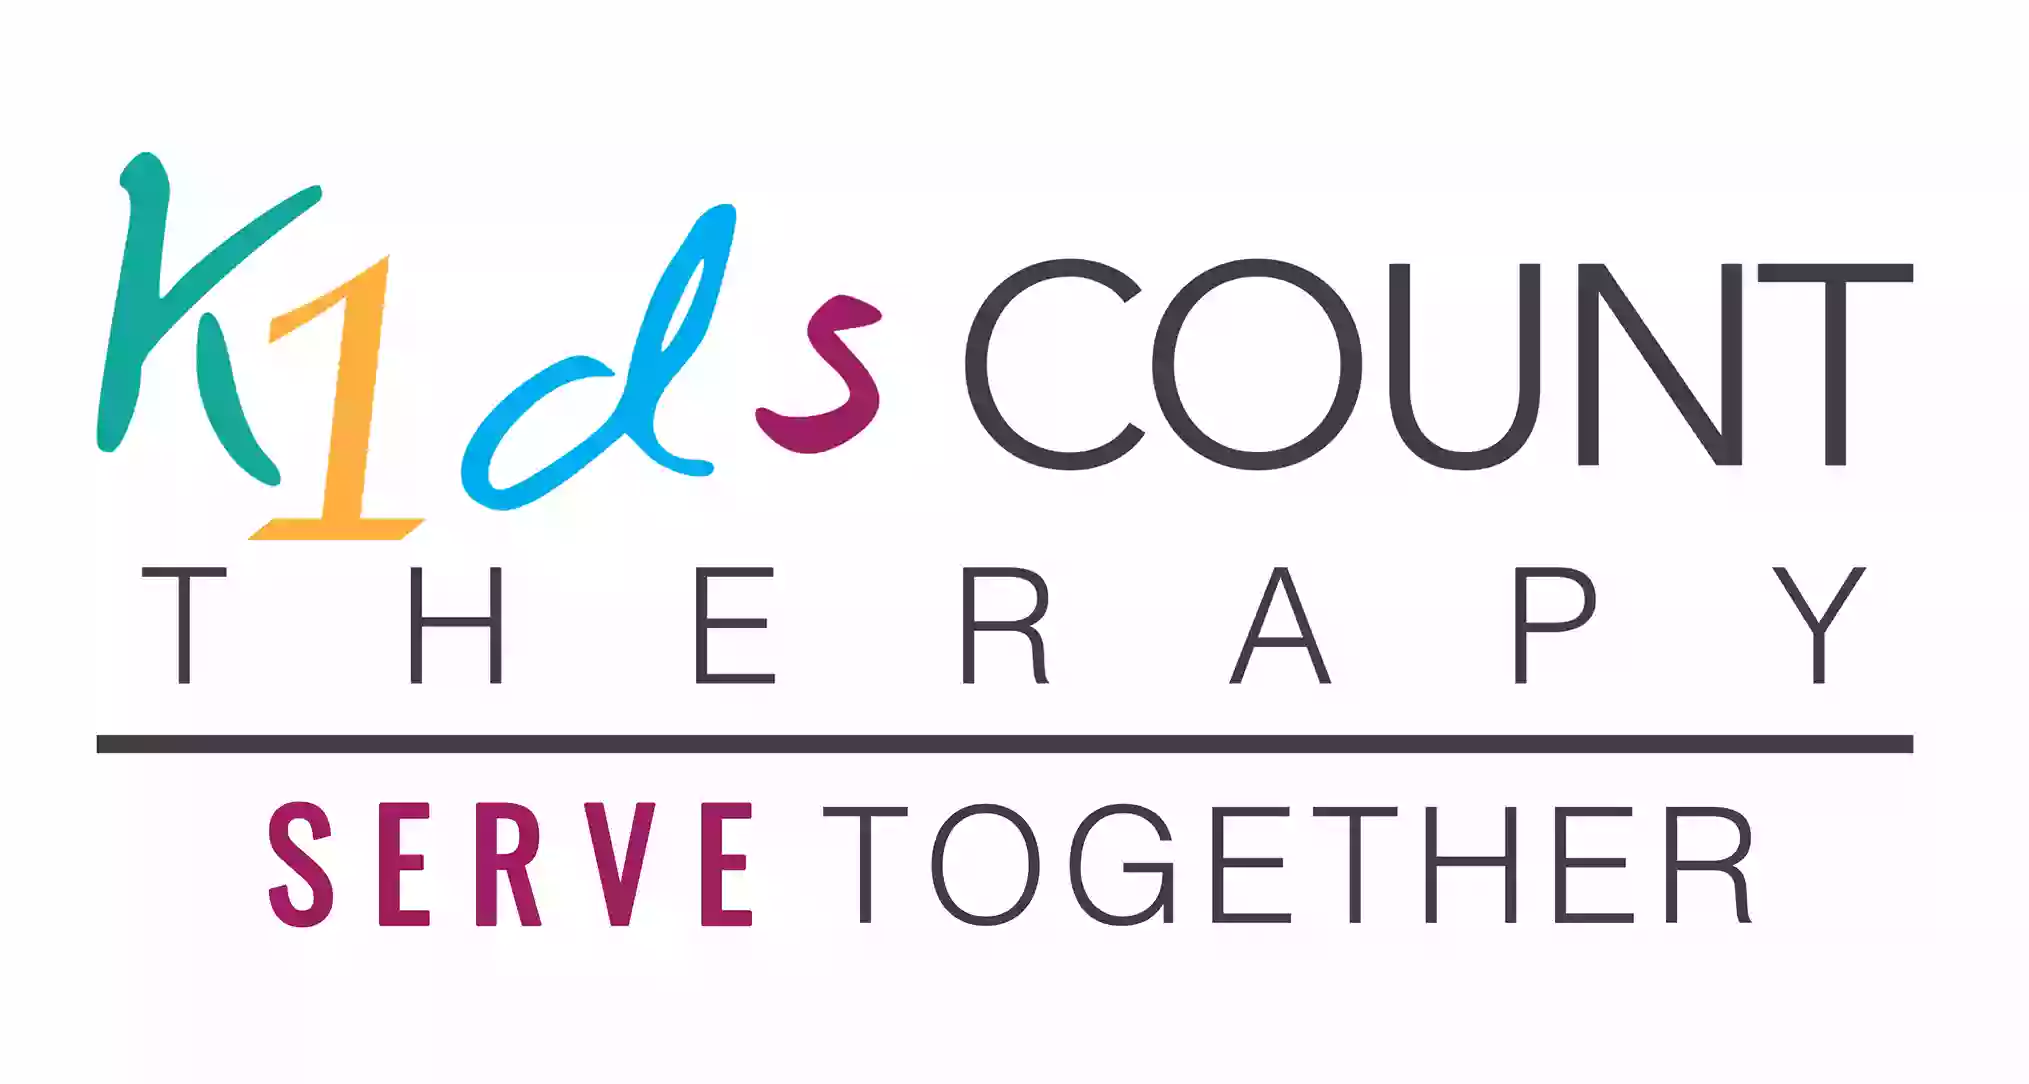 K1ds Count Therapy, LLC